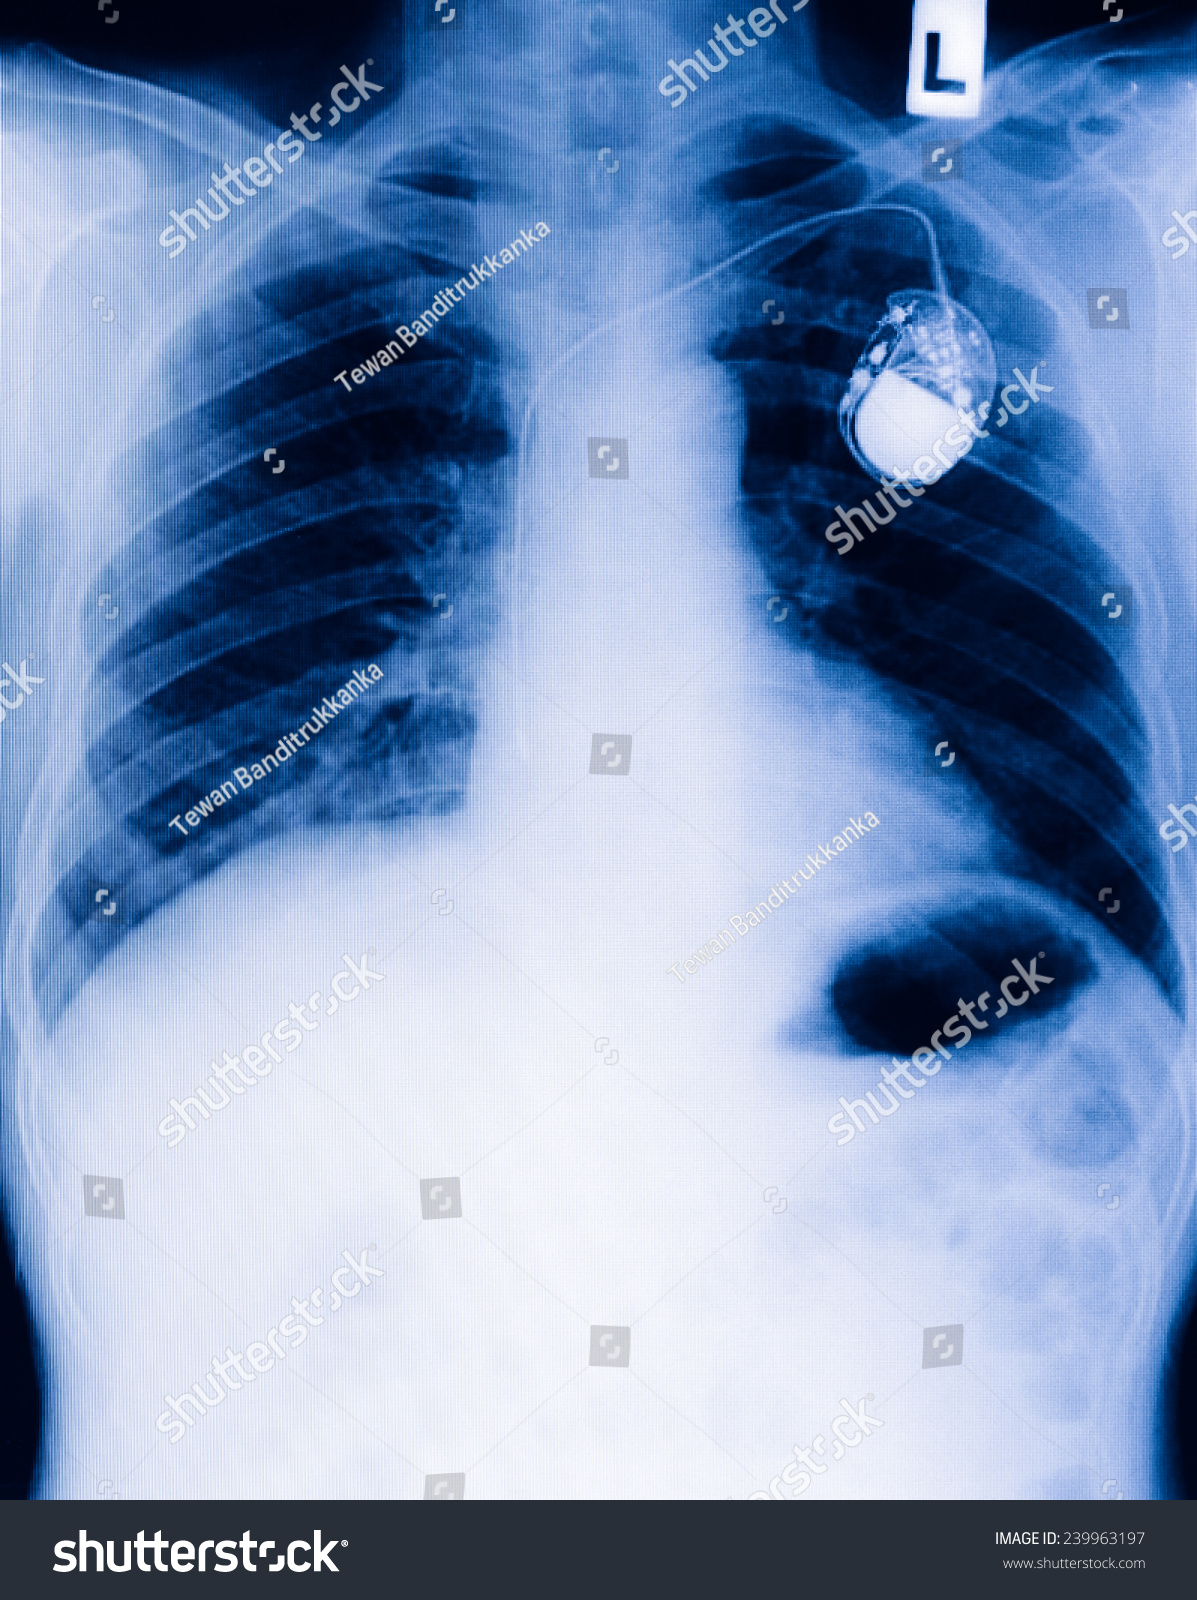 Chest Pacemaker On Xray Film Stock Photo 239963197 - Shutterstock